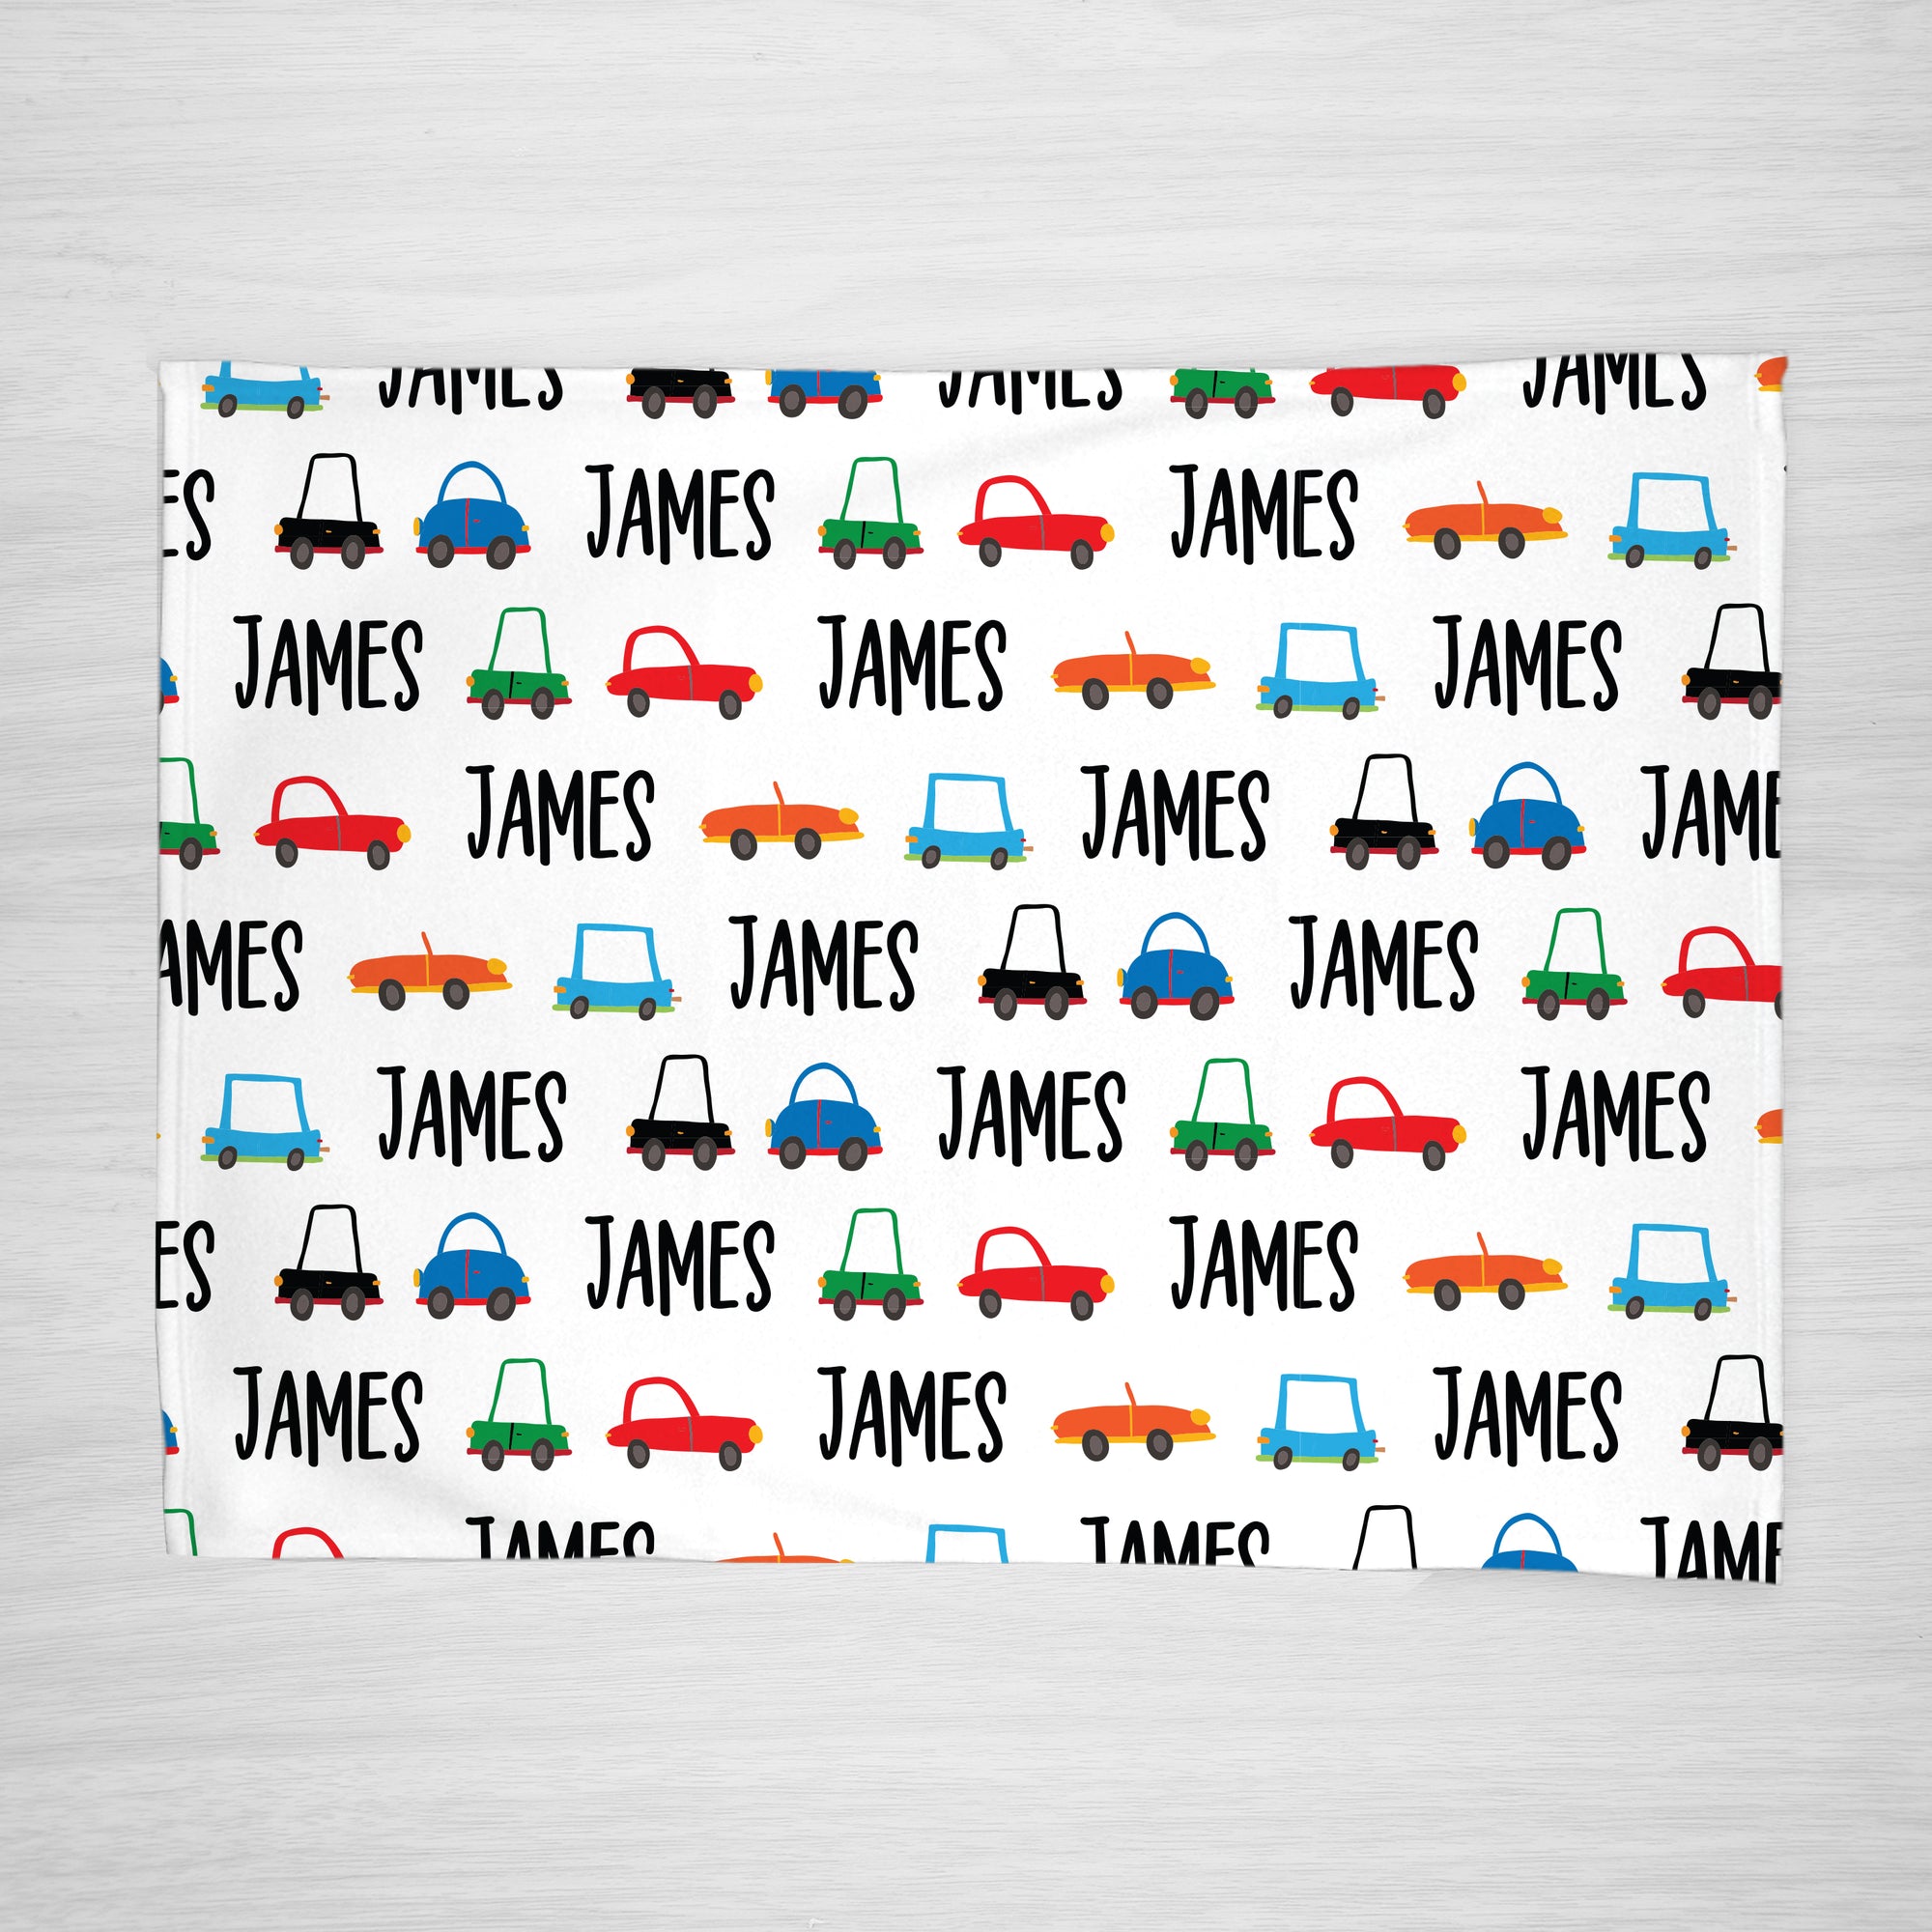 Car Personalized Name Blanket in Fleece from Pipsy.com